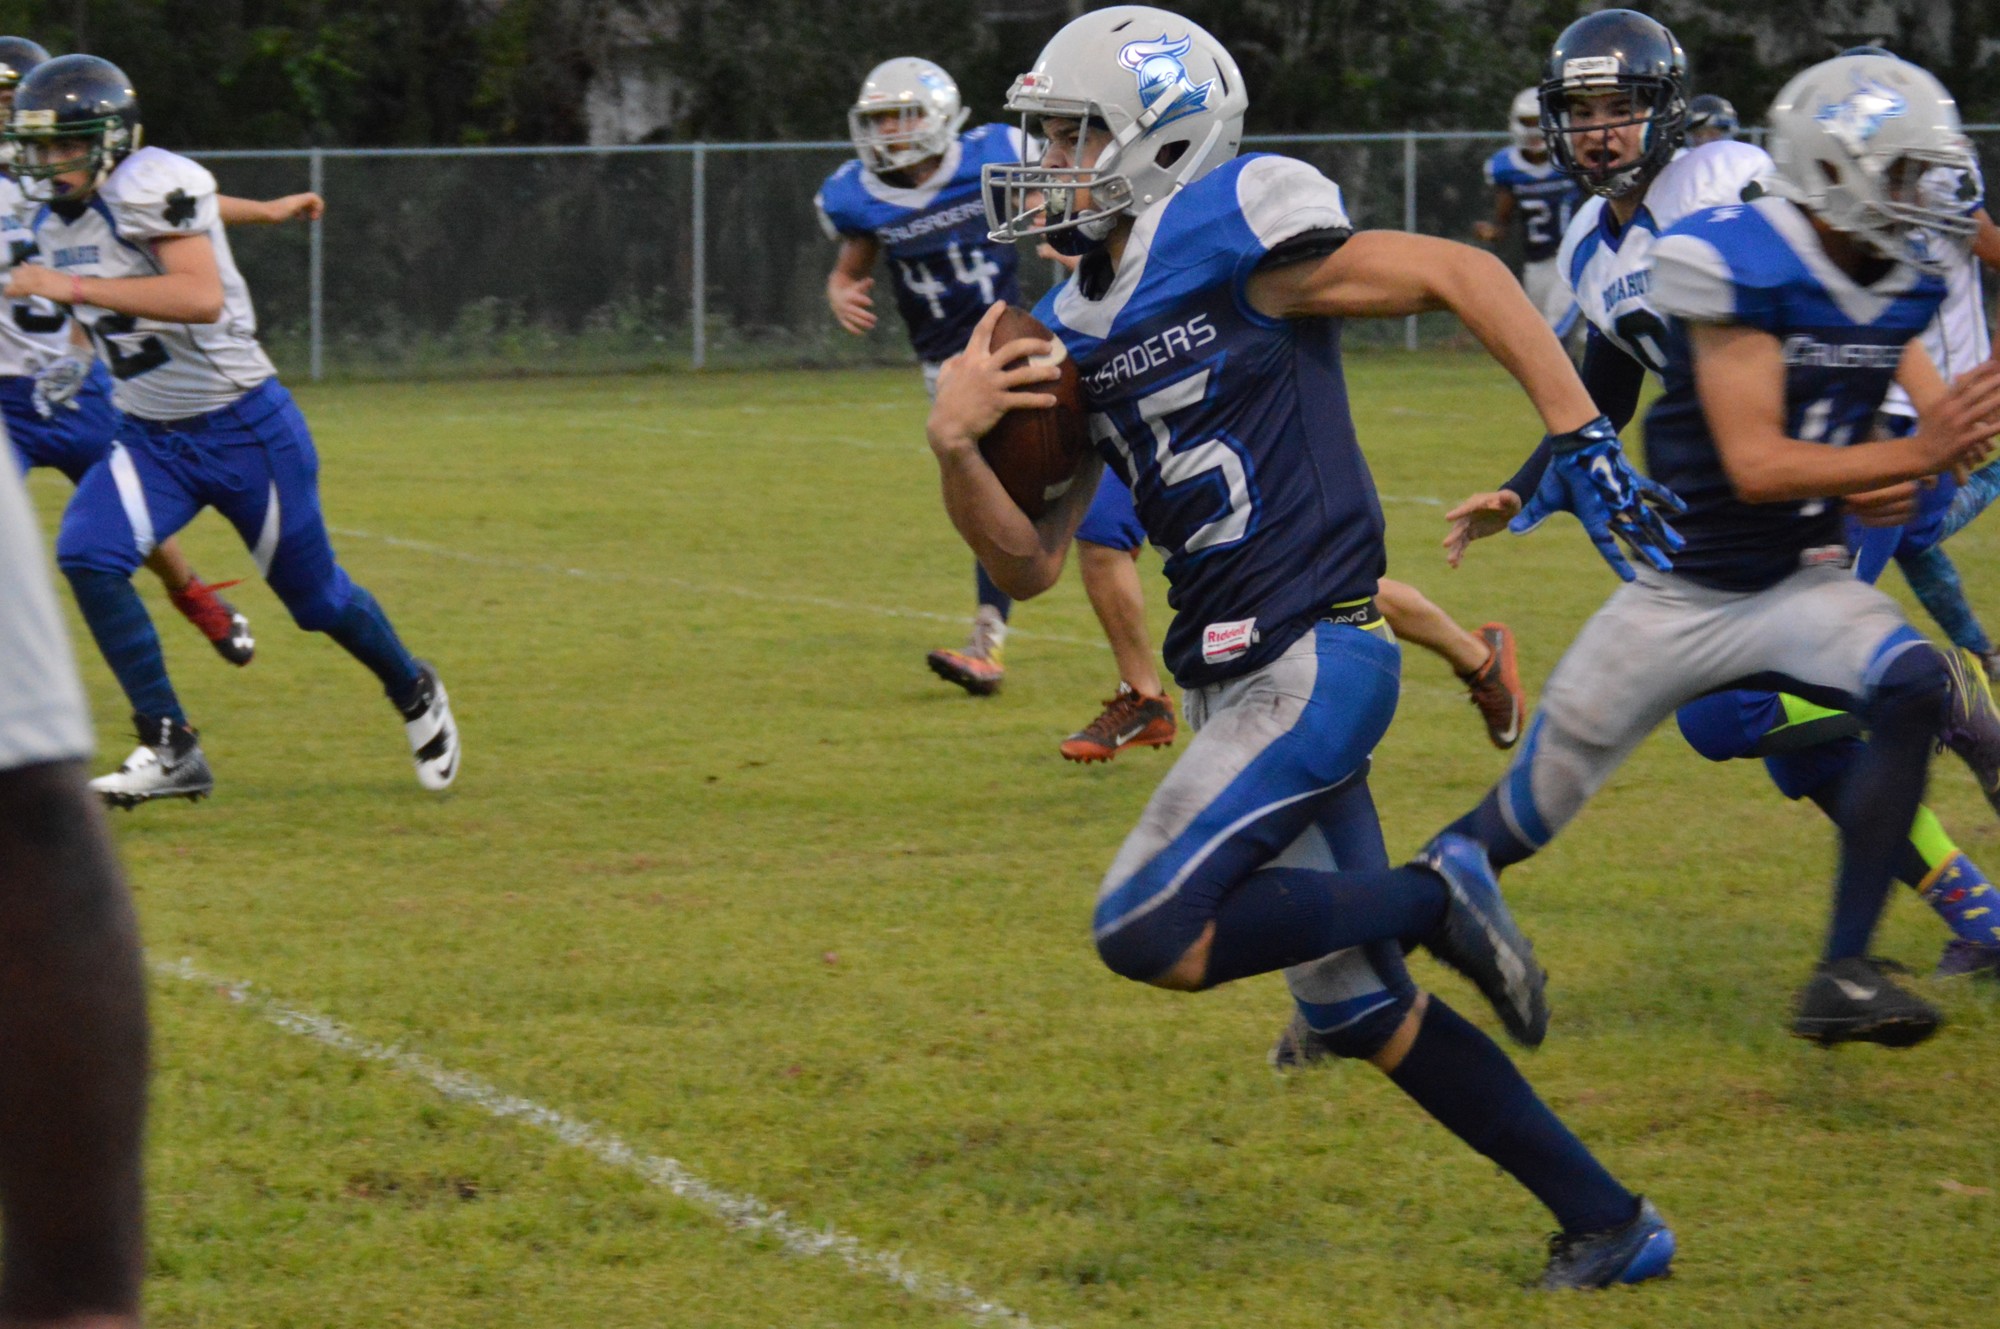 The Crusaders' Zayne Smith runs with the ball during FBCA's game against Donahue Catholic. Zayne returned a punt 60 yards for a touchdown. Photo courtesy of Stephanie Sumler